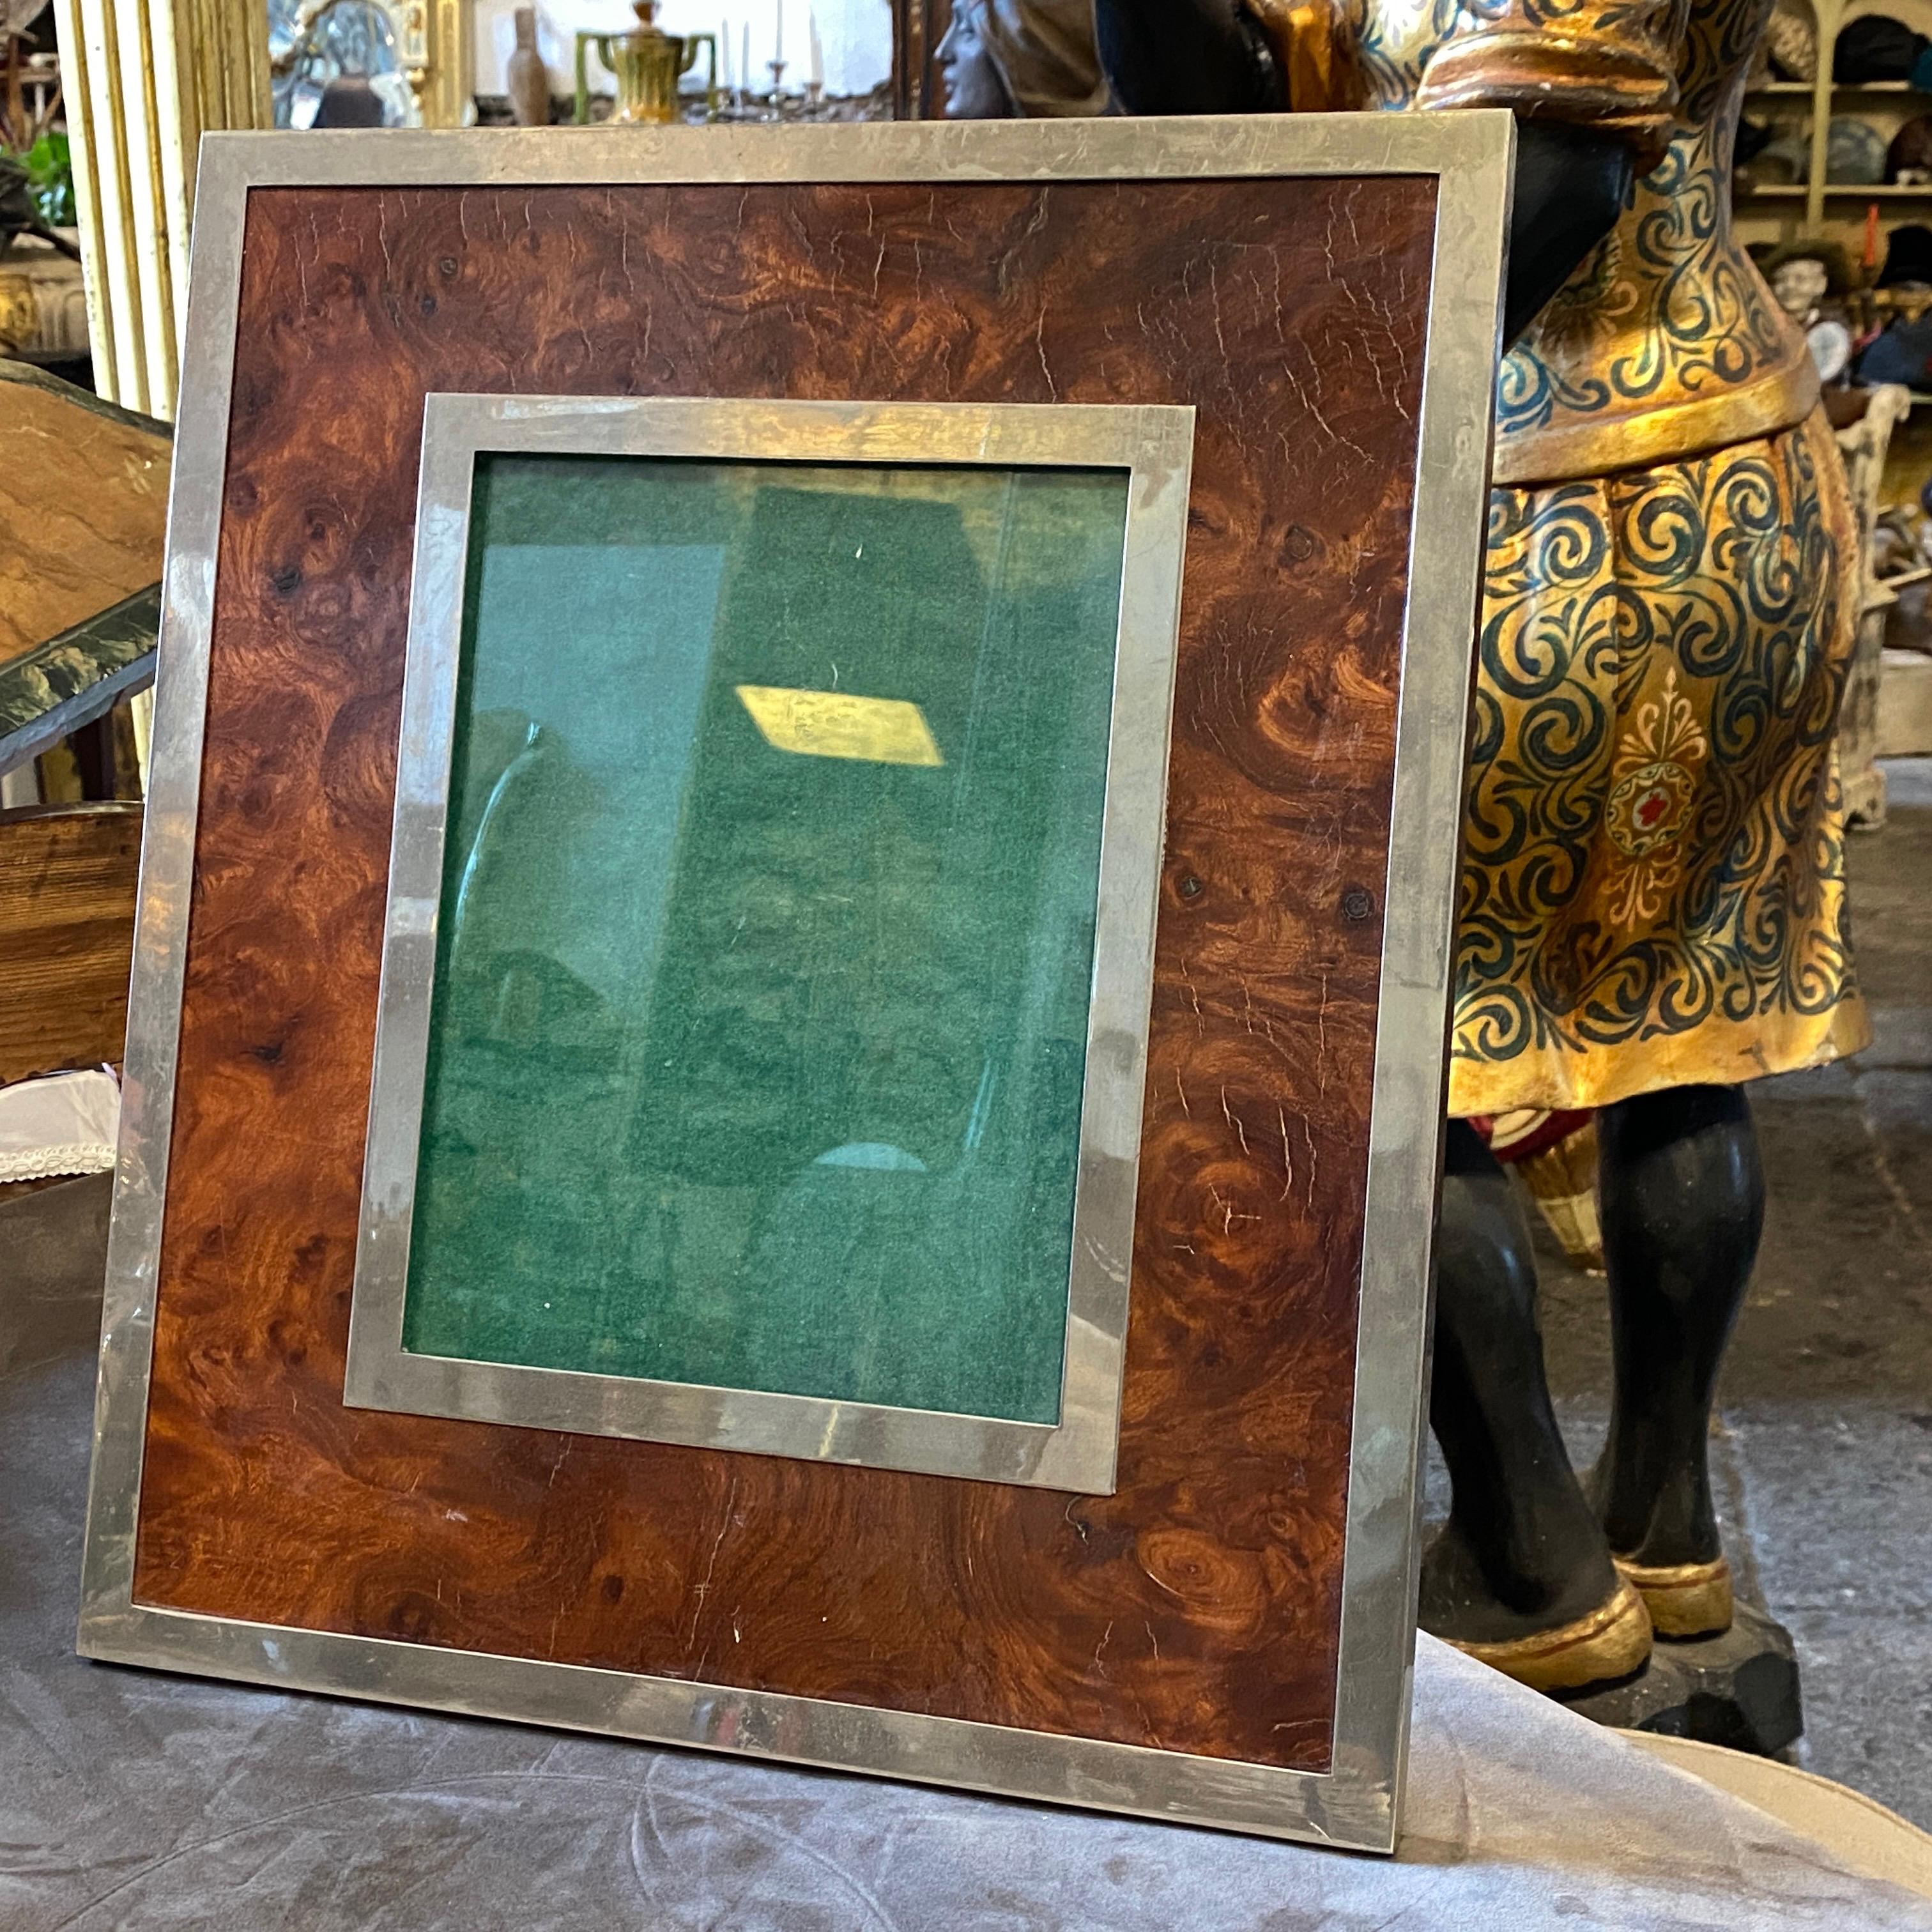 A stylish table frame made in Italy in the Seventies, it's labeled Richard GInori. Metal and wood are in good conditions.